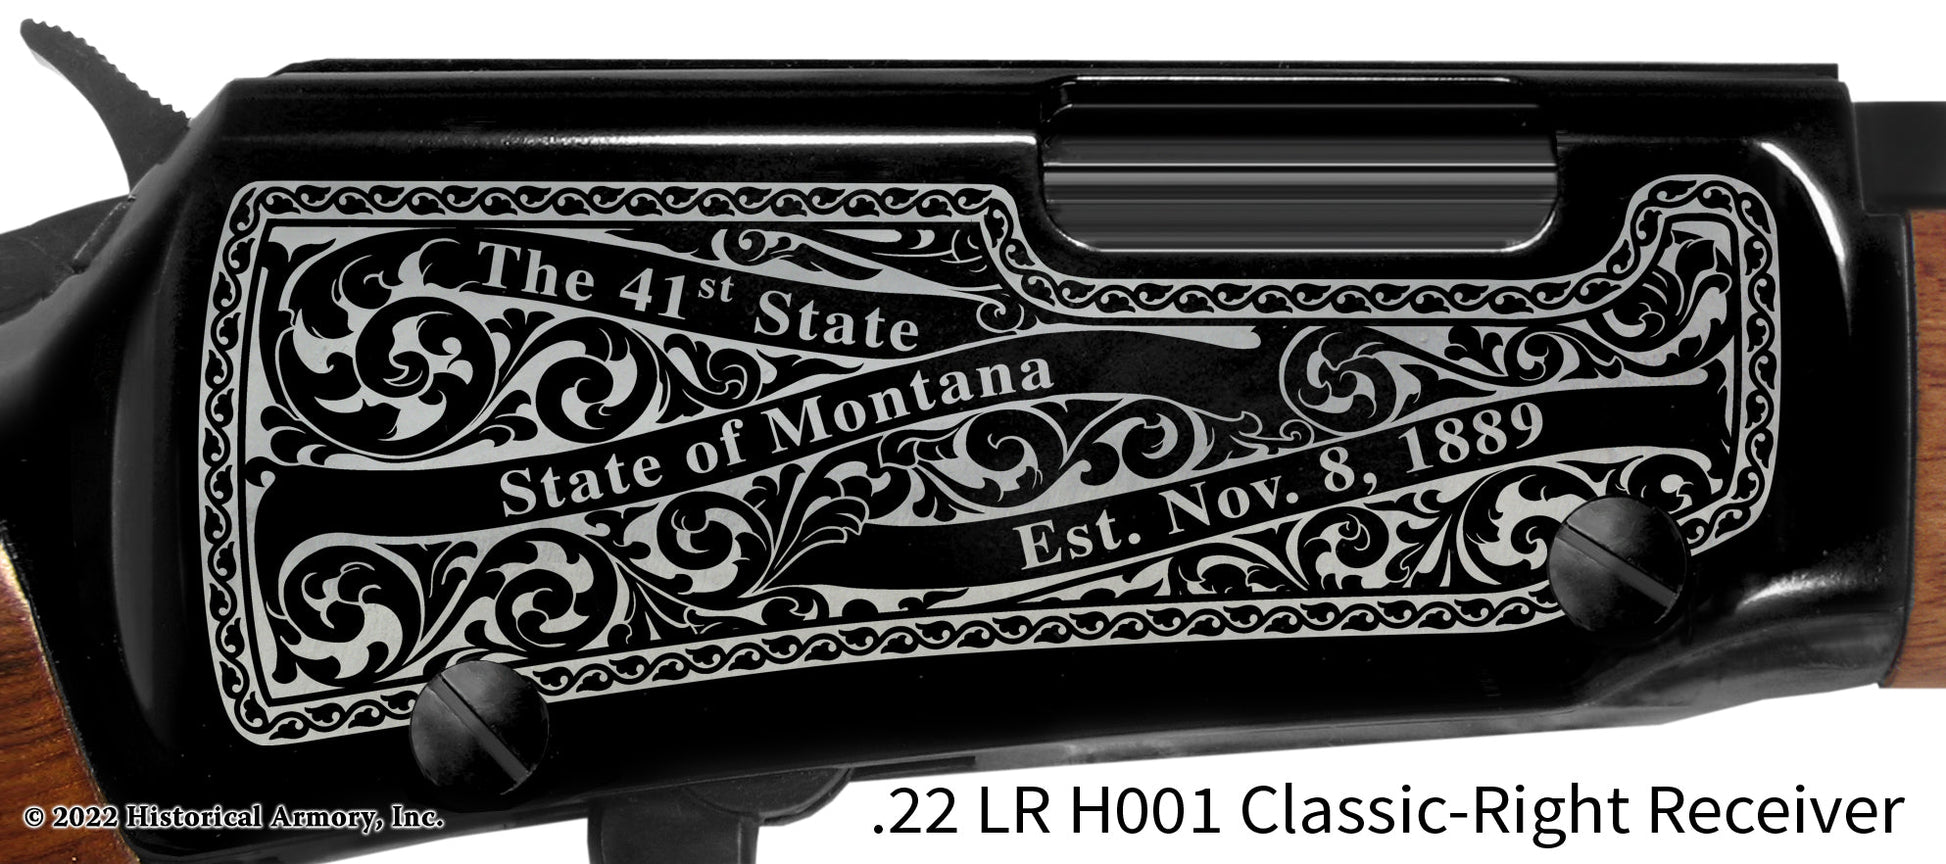 Jefferson County Montana Engraved Henry H001 Rifle